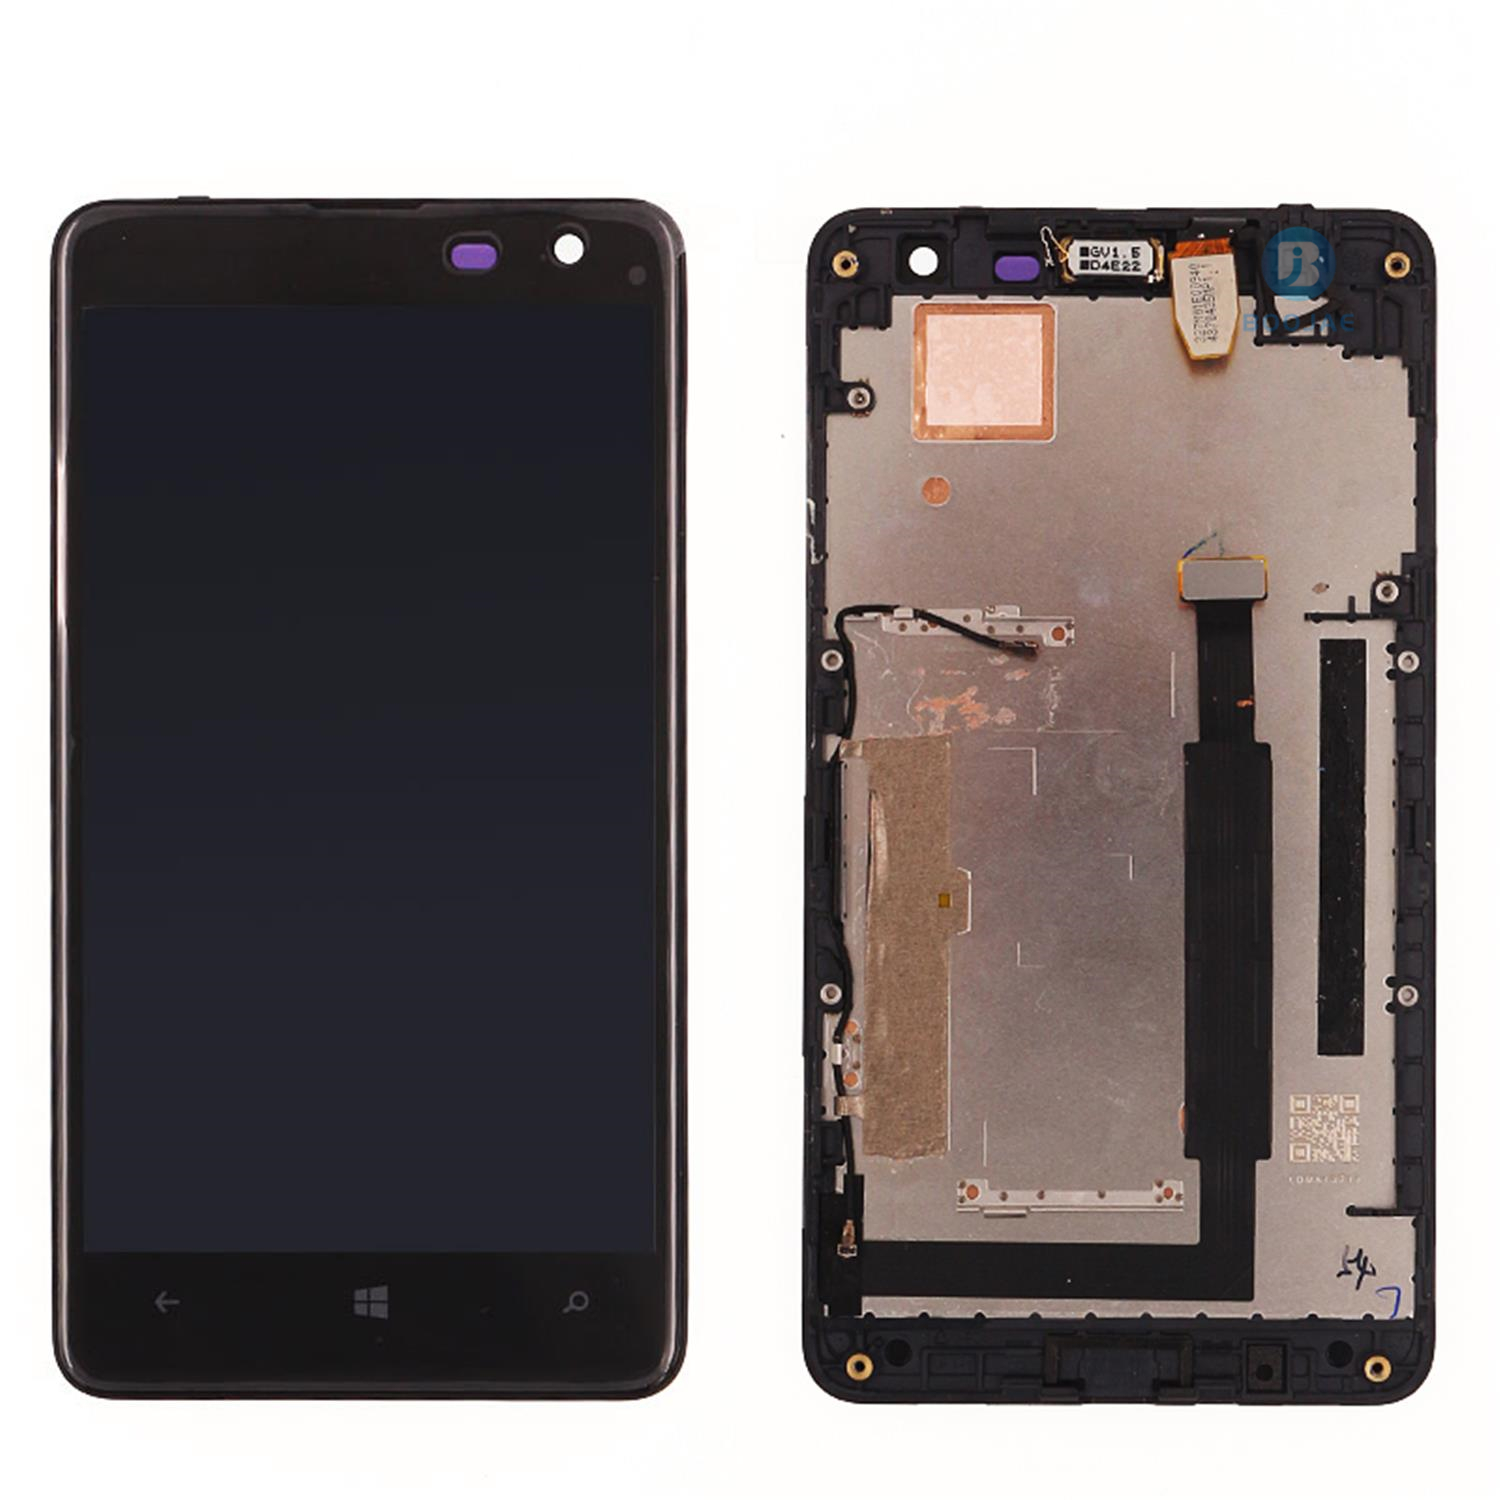 For Nokia Lumia 625 LCD Screen Display and Touch Panel Digitizer Assembly Replacement